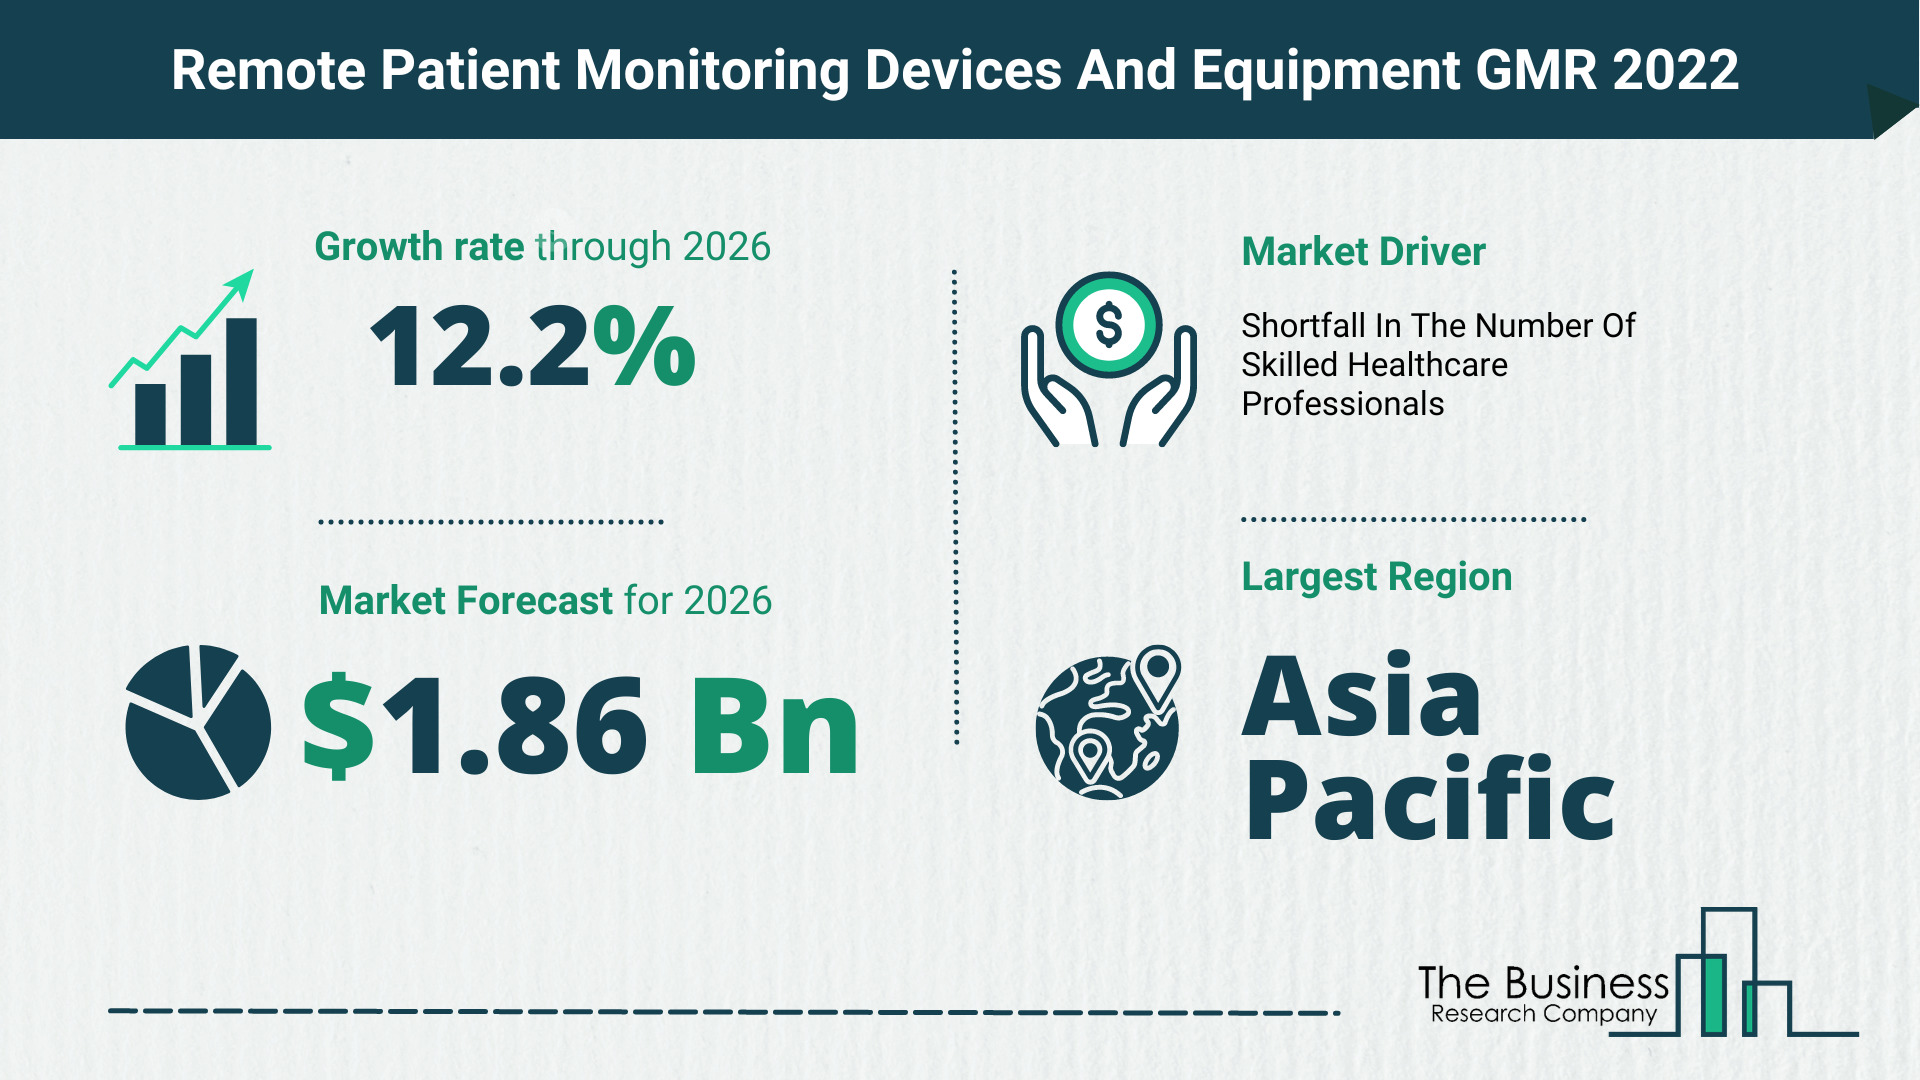 Global Remote Patient Monitoring Devices And Equipment Market 2022 – Market Opportunities And Strategies